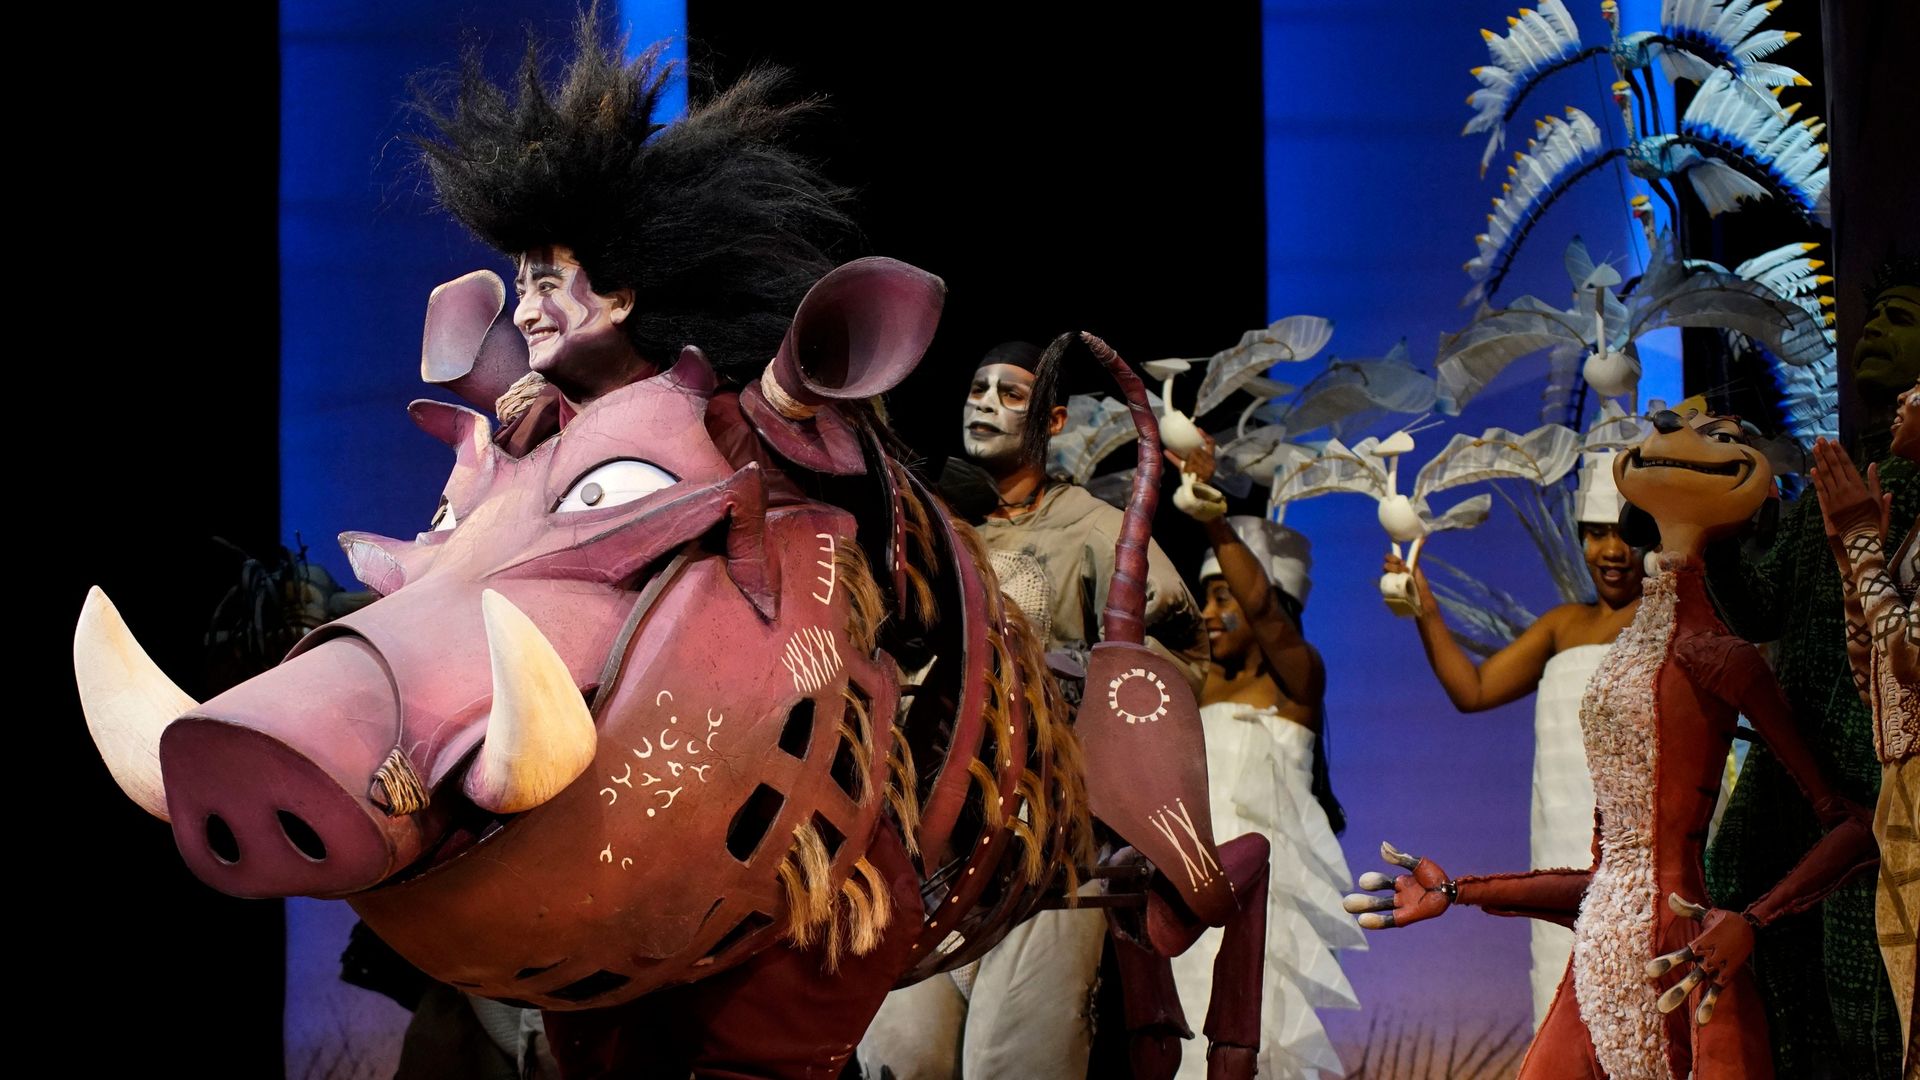 Cast members from "The Lion King" musical on stage.